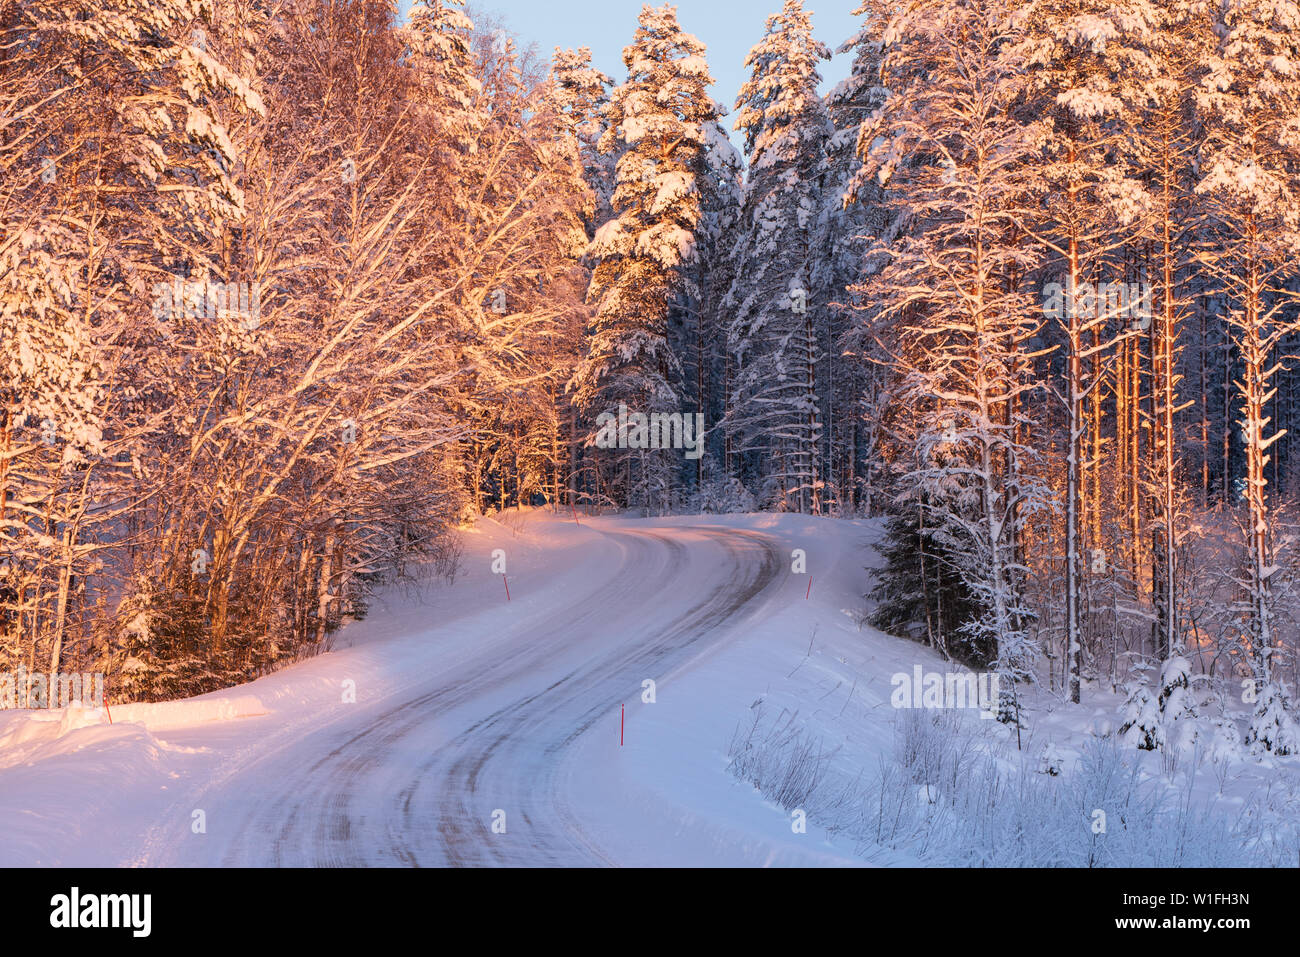 Snowy And Icy Road Winding Through Winter Forest Landscape Stock